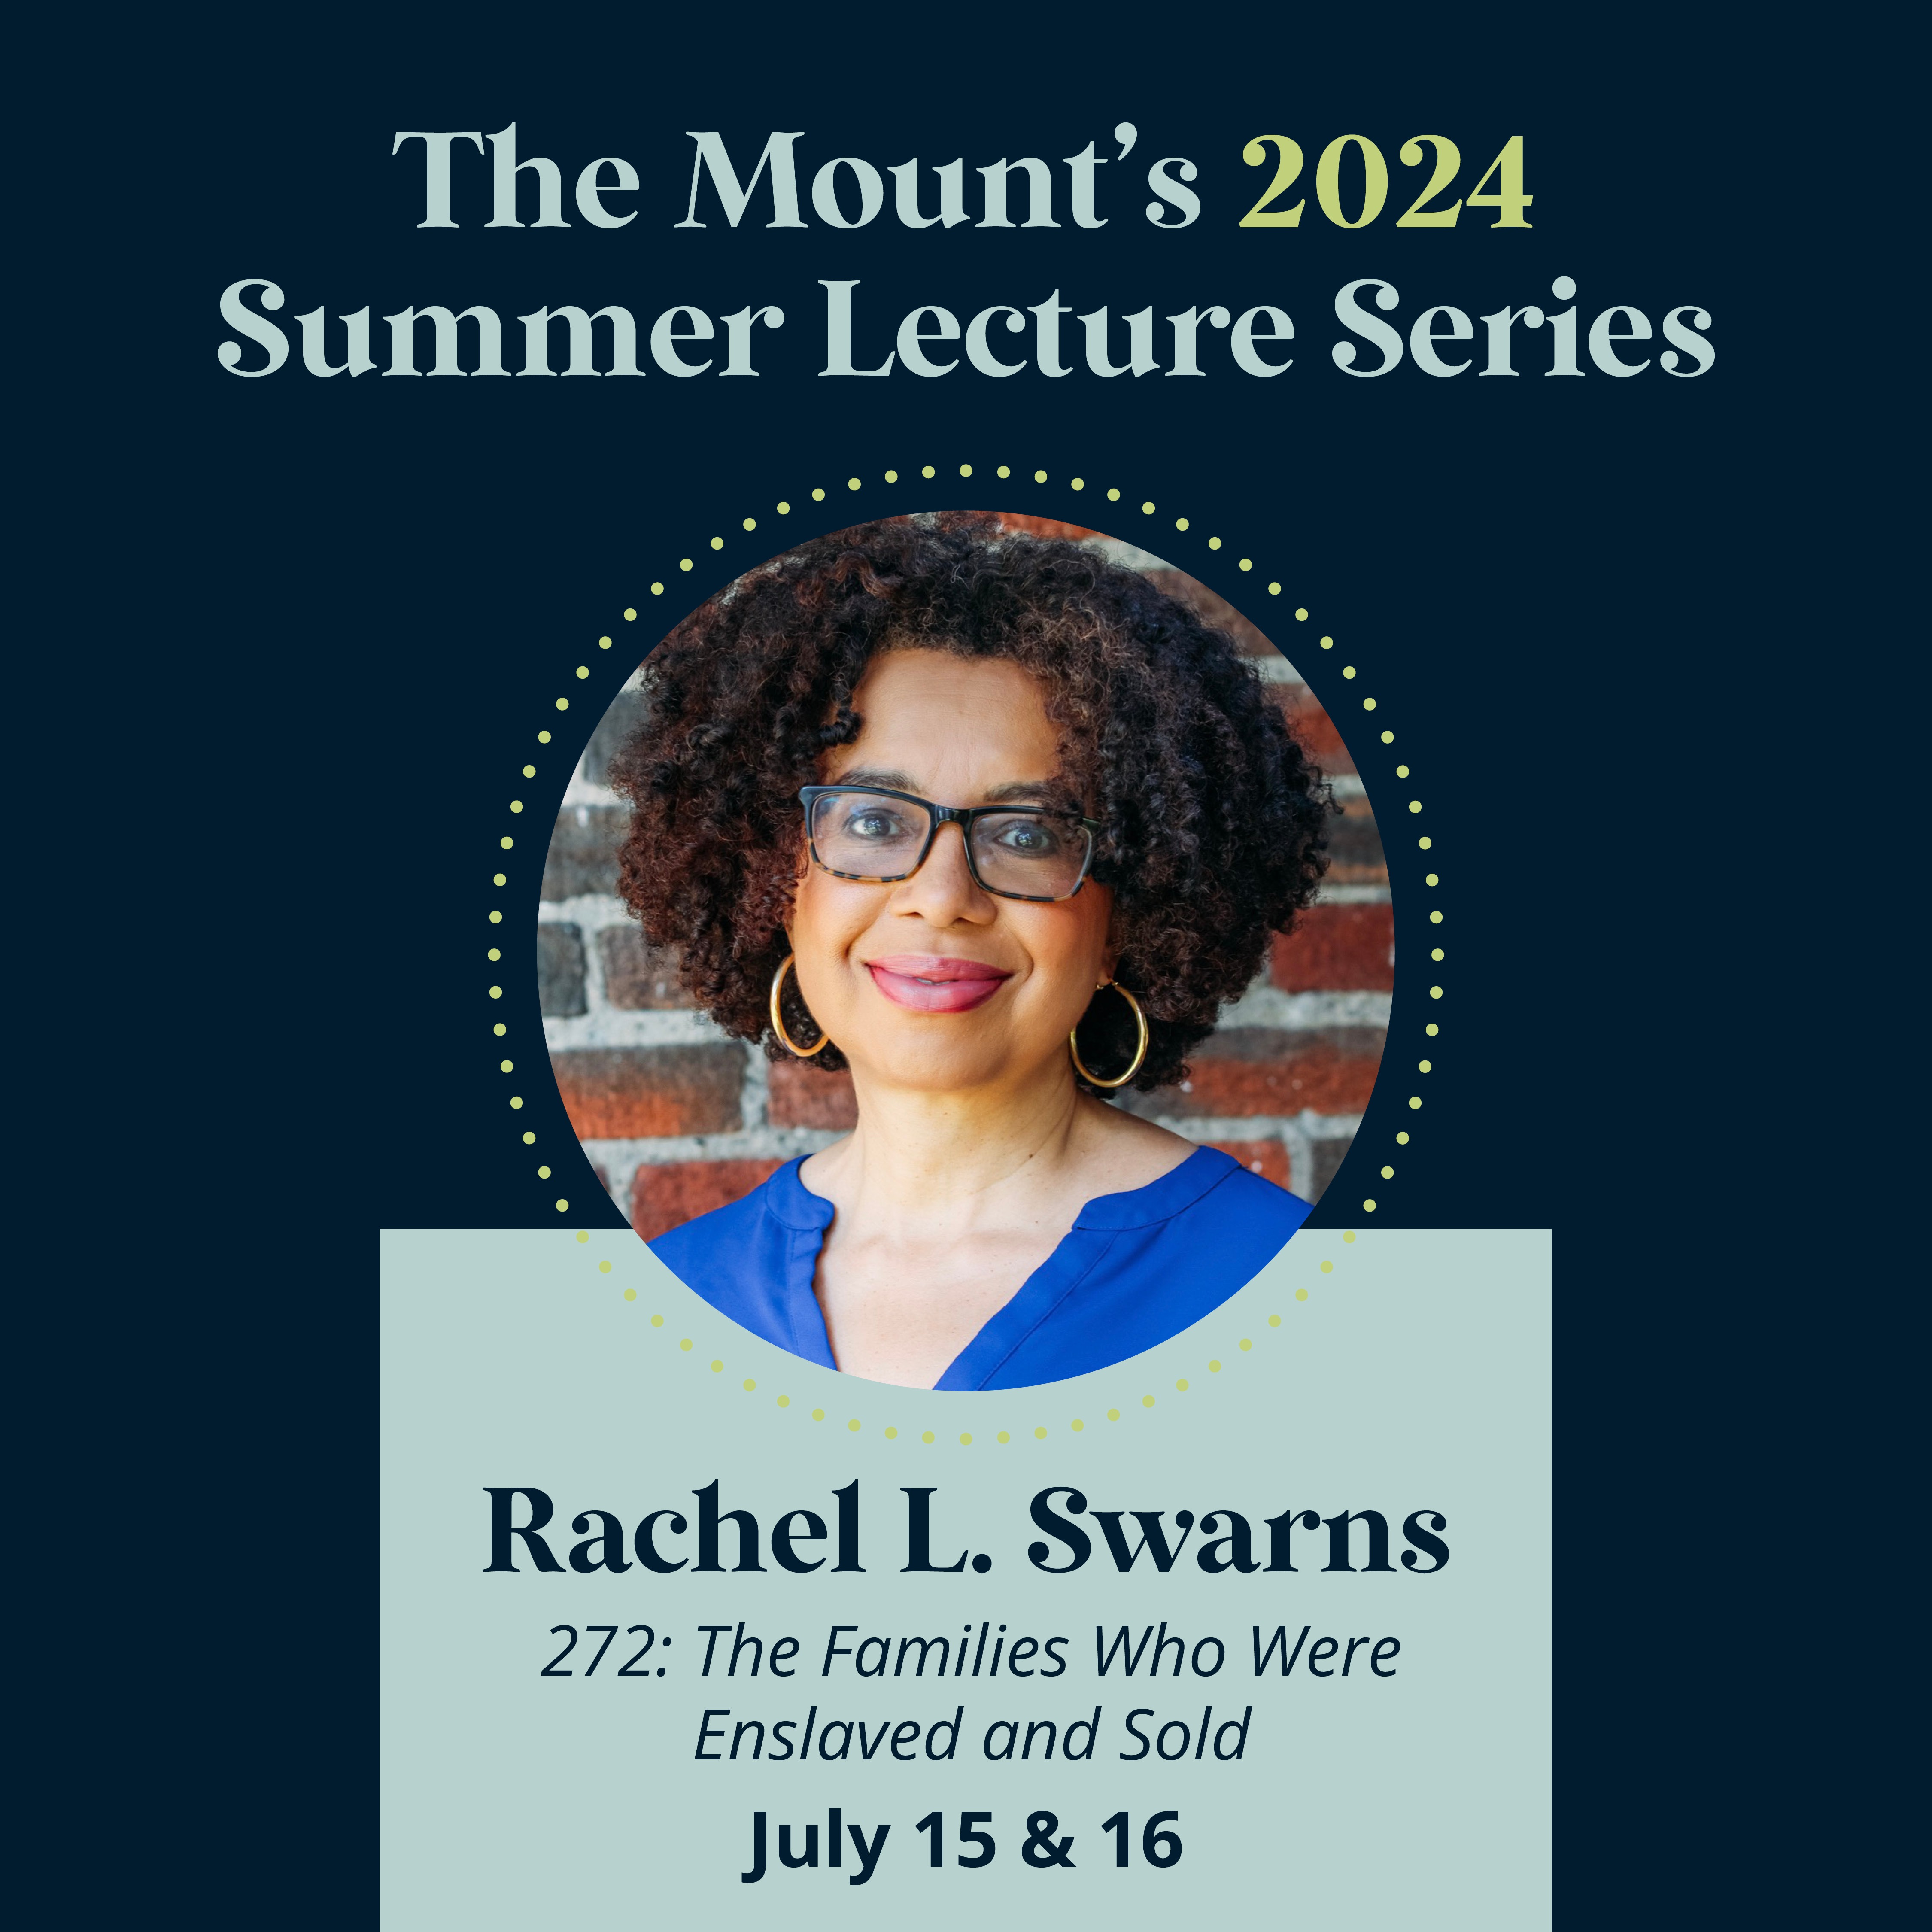 Monday lecture with Rachel L. Swarns